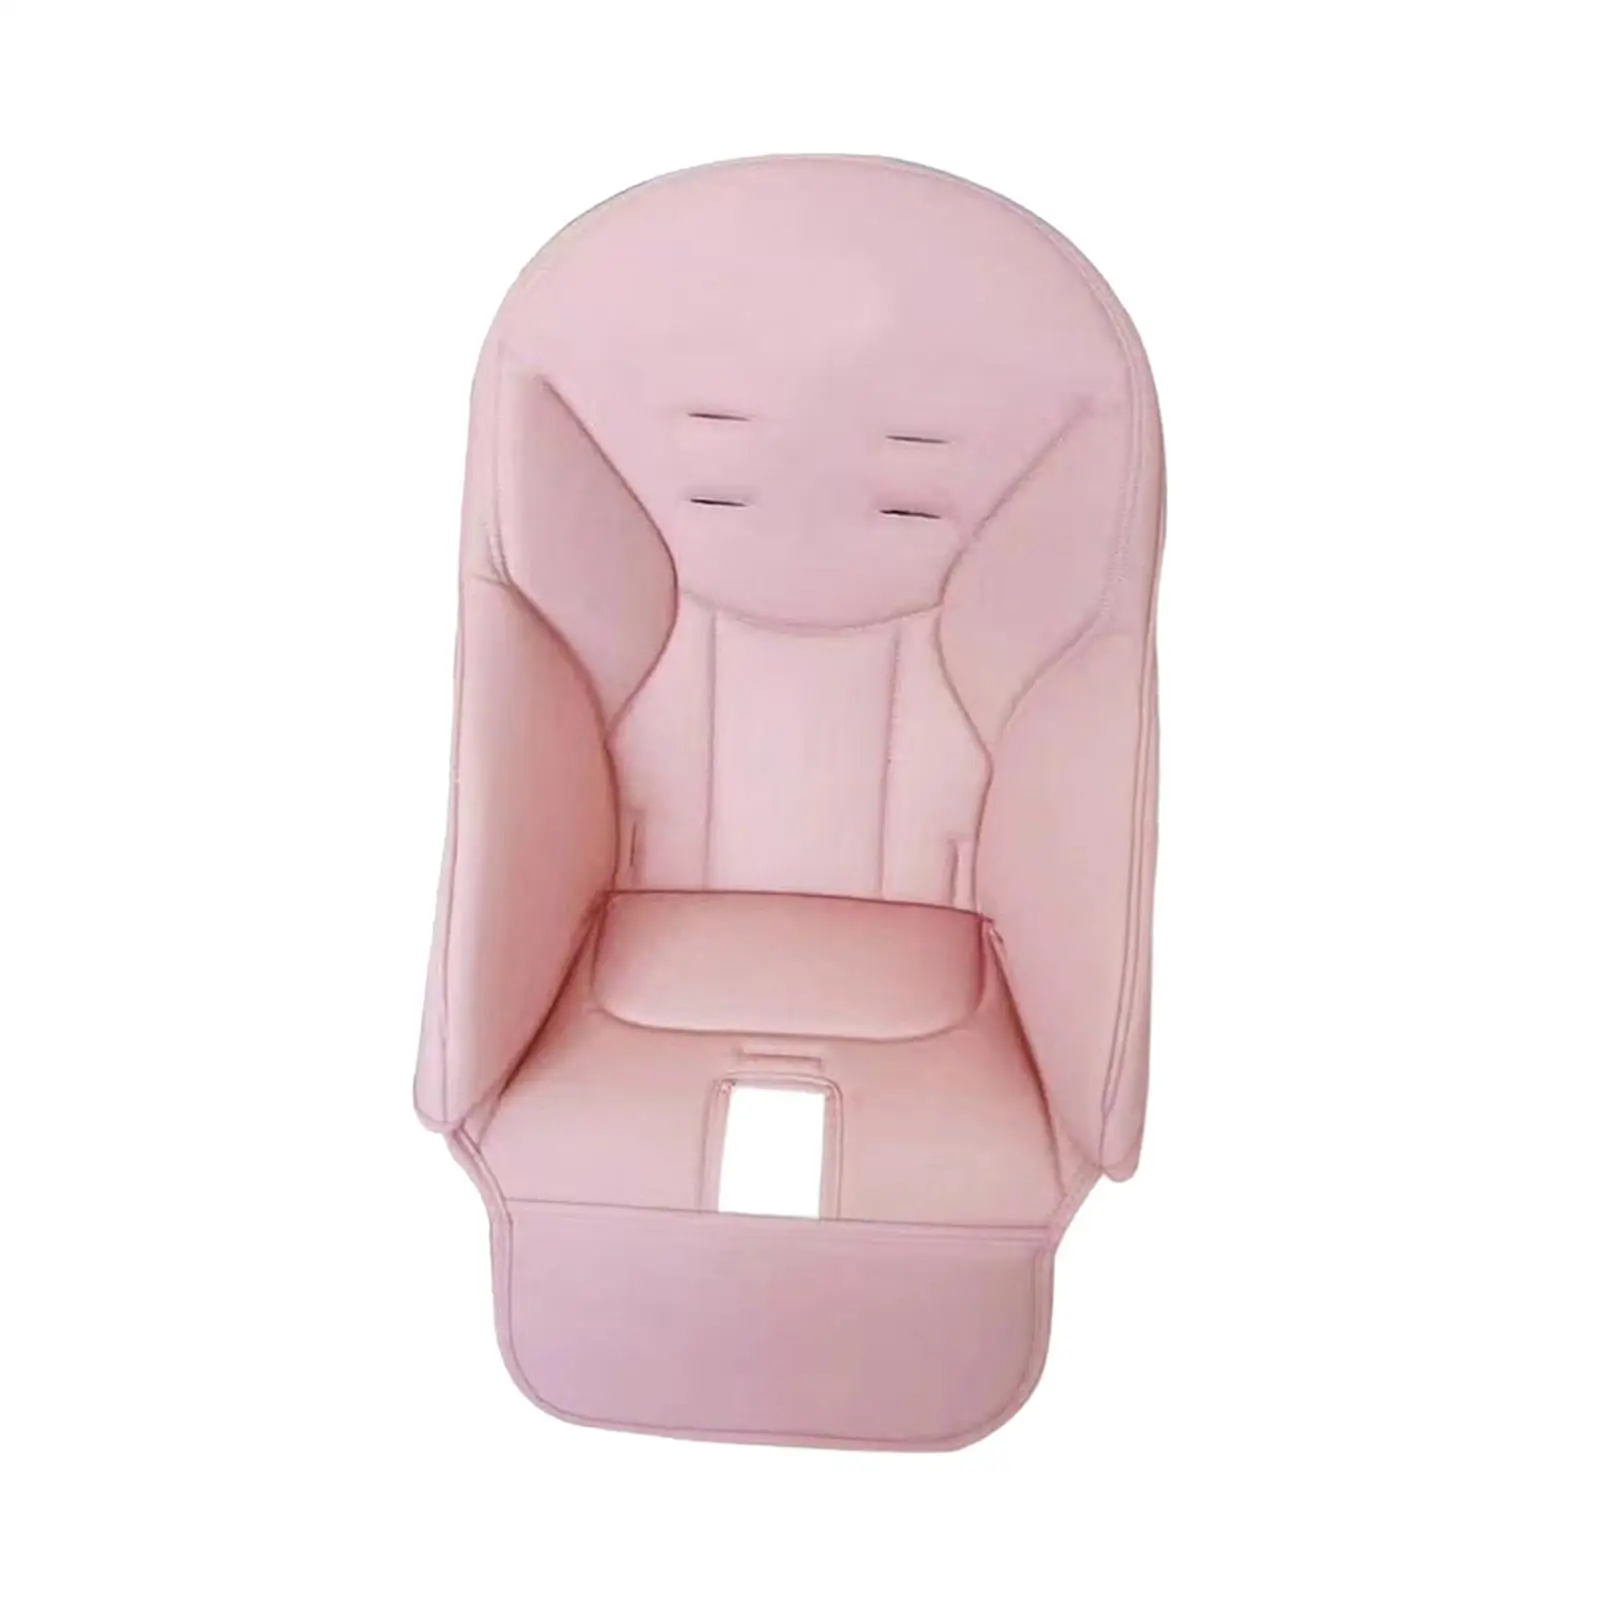 Baby Dining Chair Cover Kid Portable Comfortable Backrest Baby Outdoor Beach Chair Girls Toddlers Boys Chair Protector 1Pcs